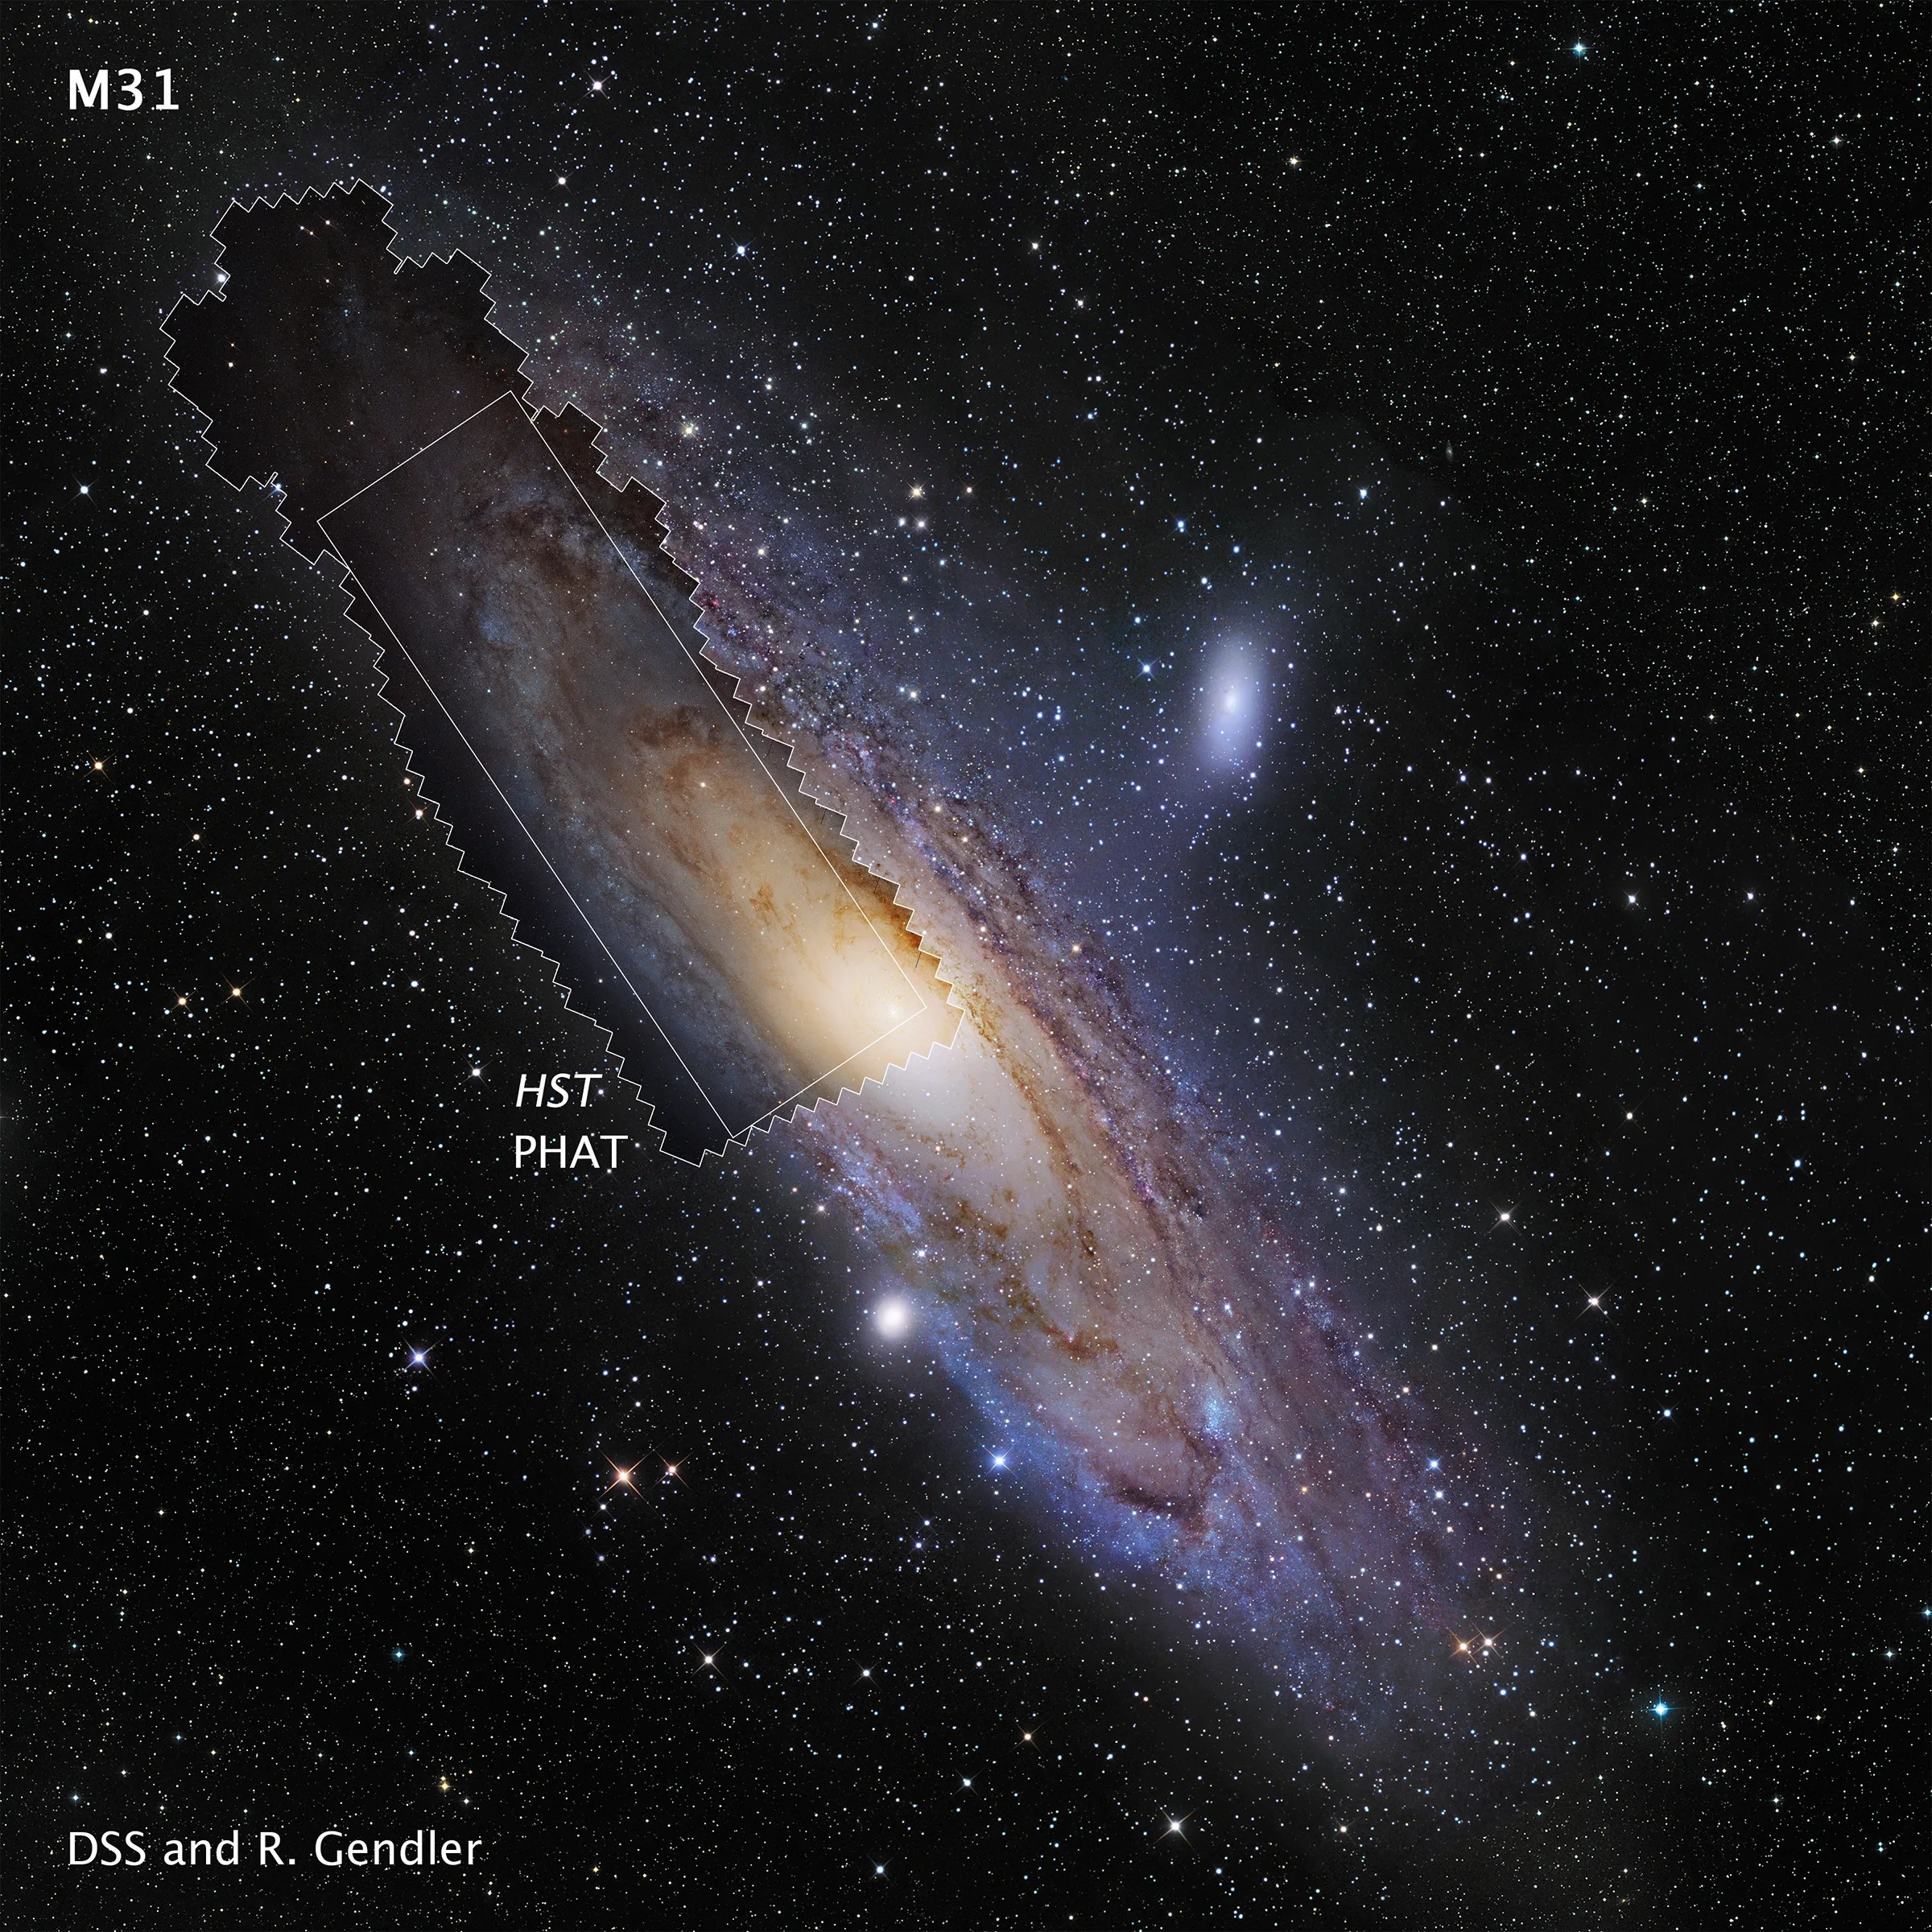 M31 mosaic, inset in ground-based image to show what part of the galaxy Hubble has imaged.